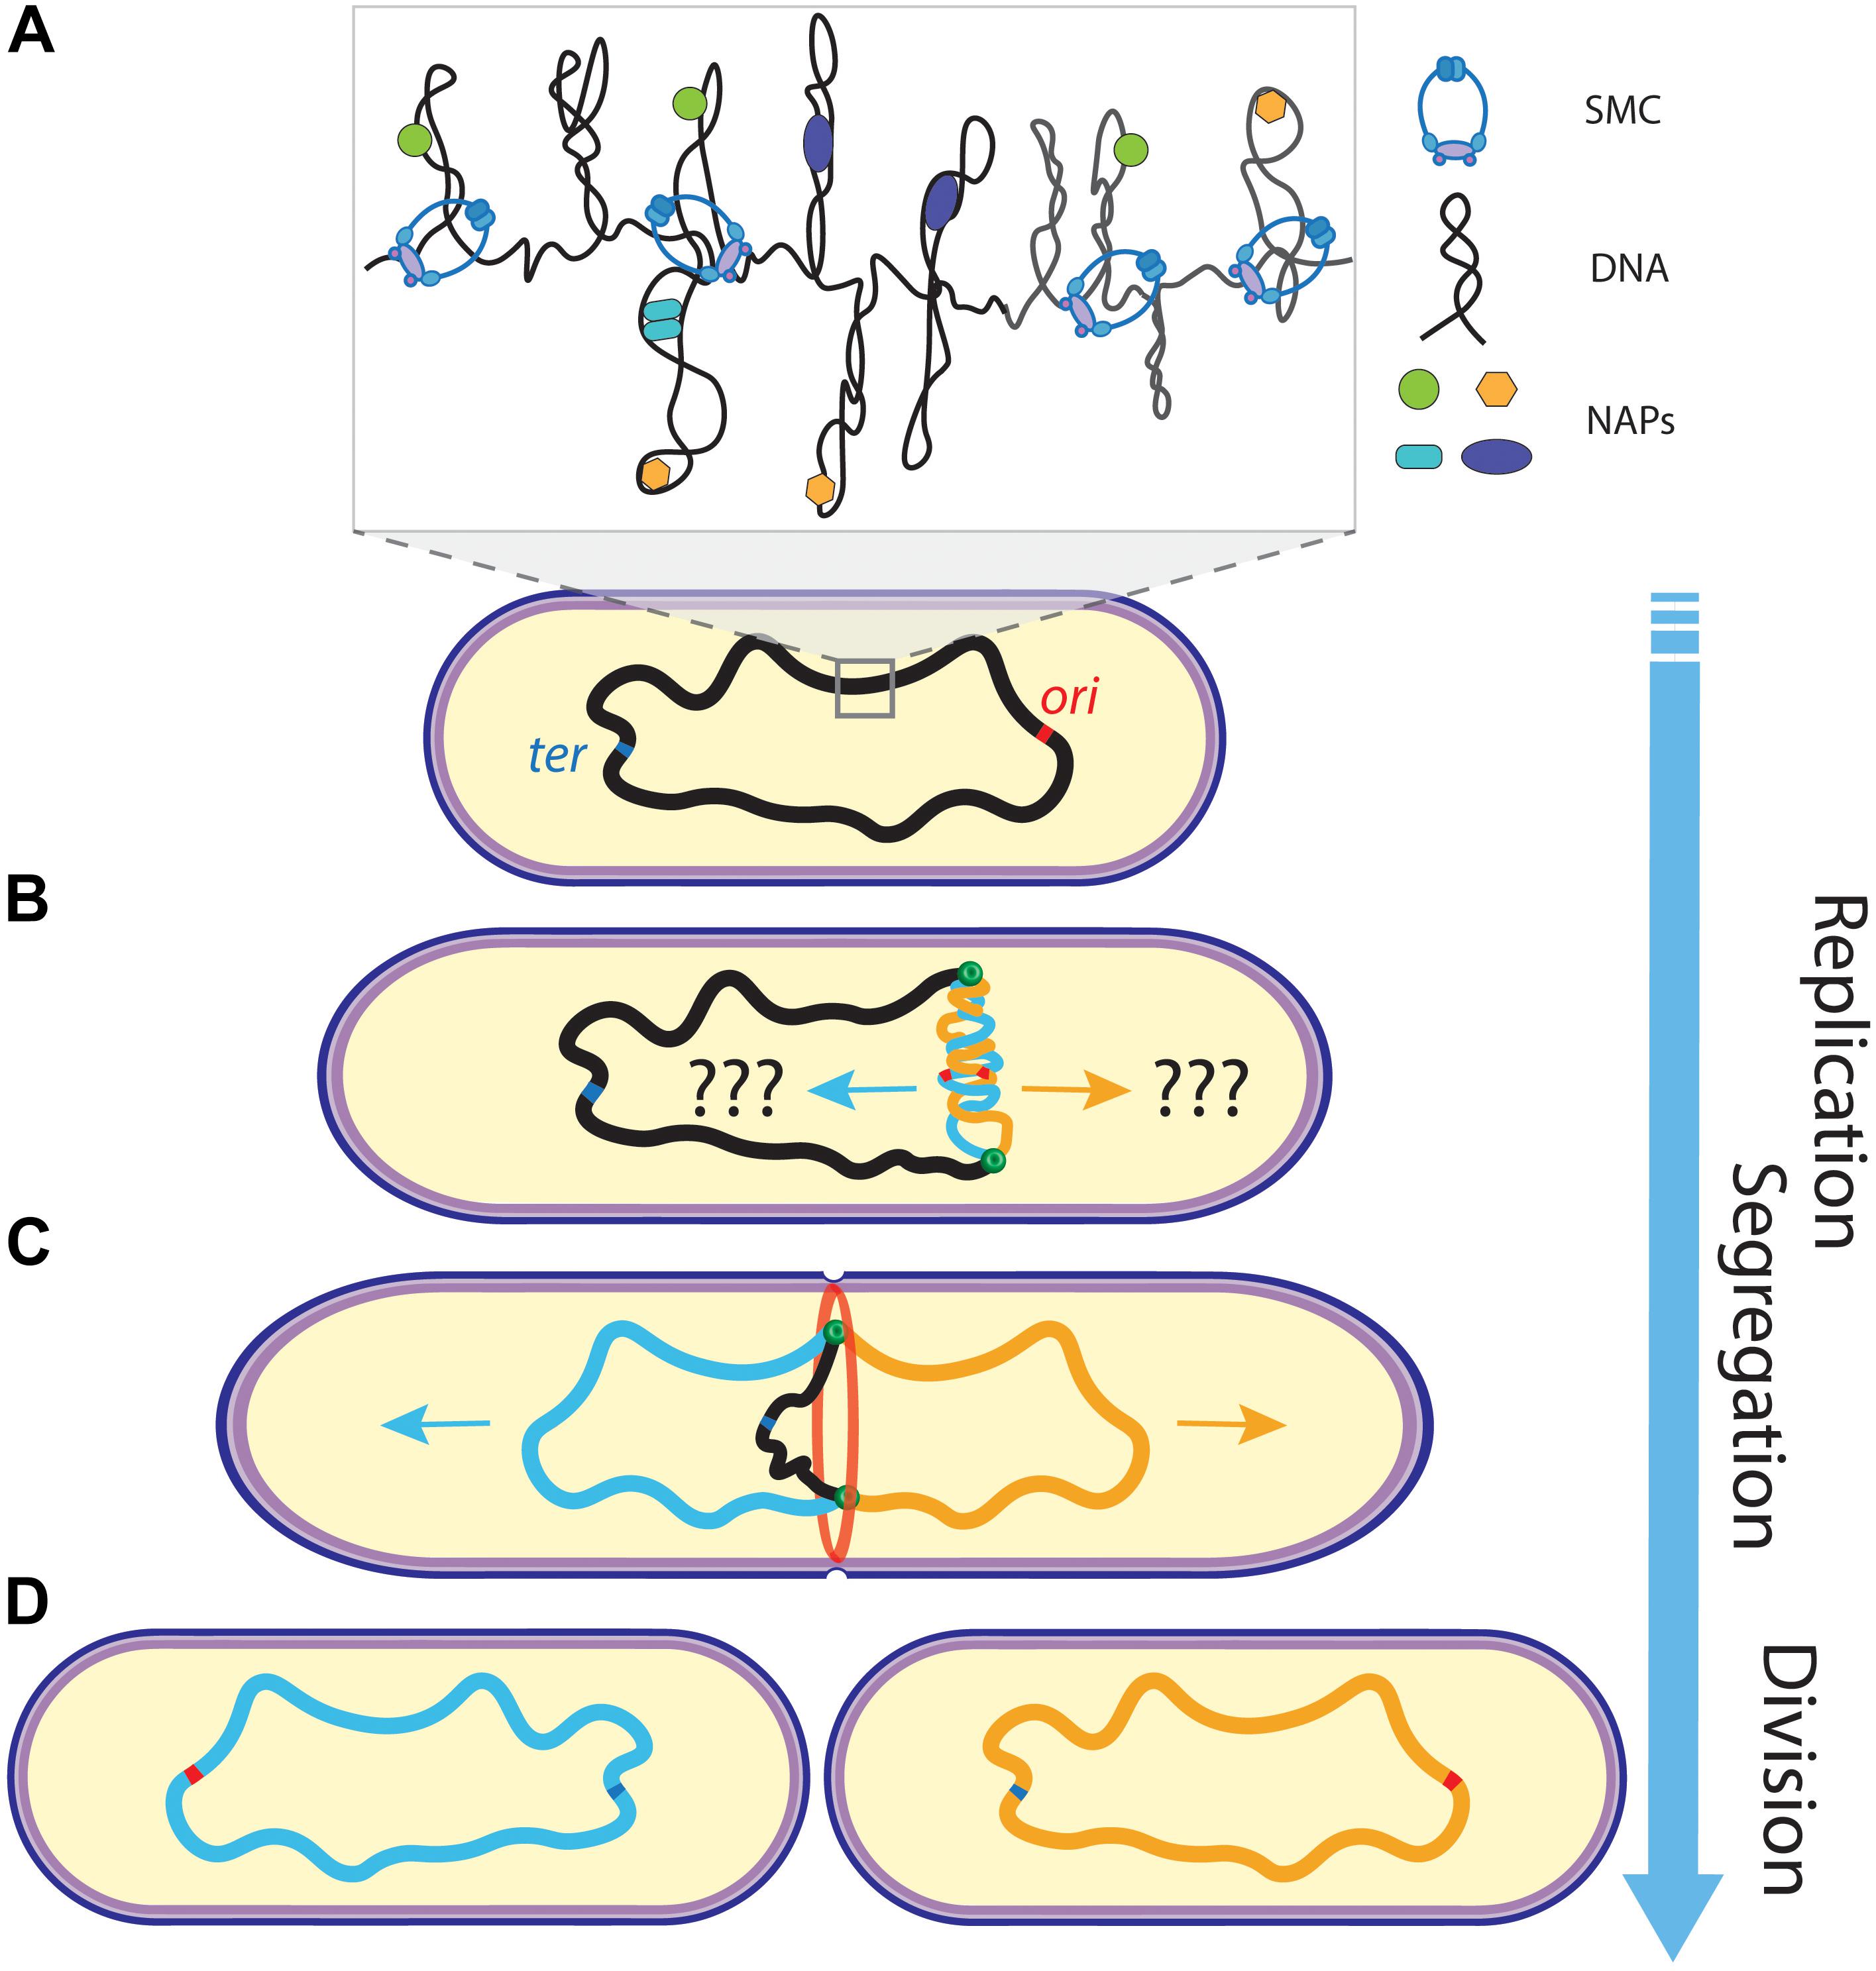 Frontiers | Mechanisms for Chromosome Segregation in Bacteria